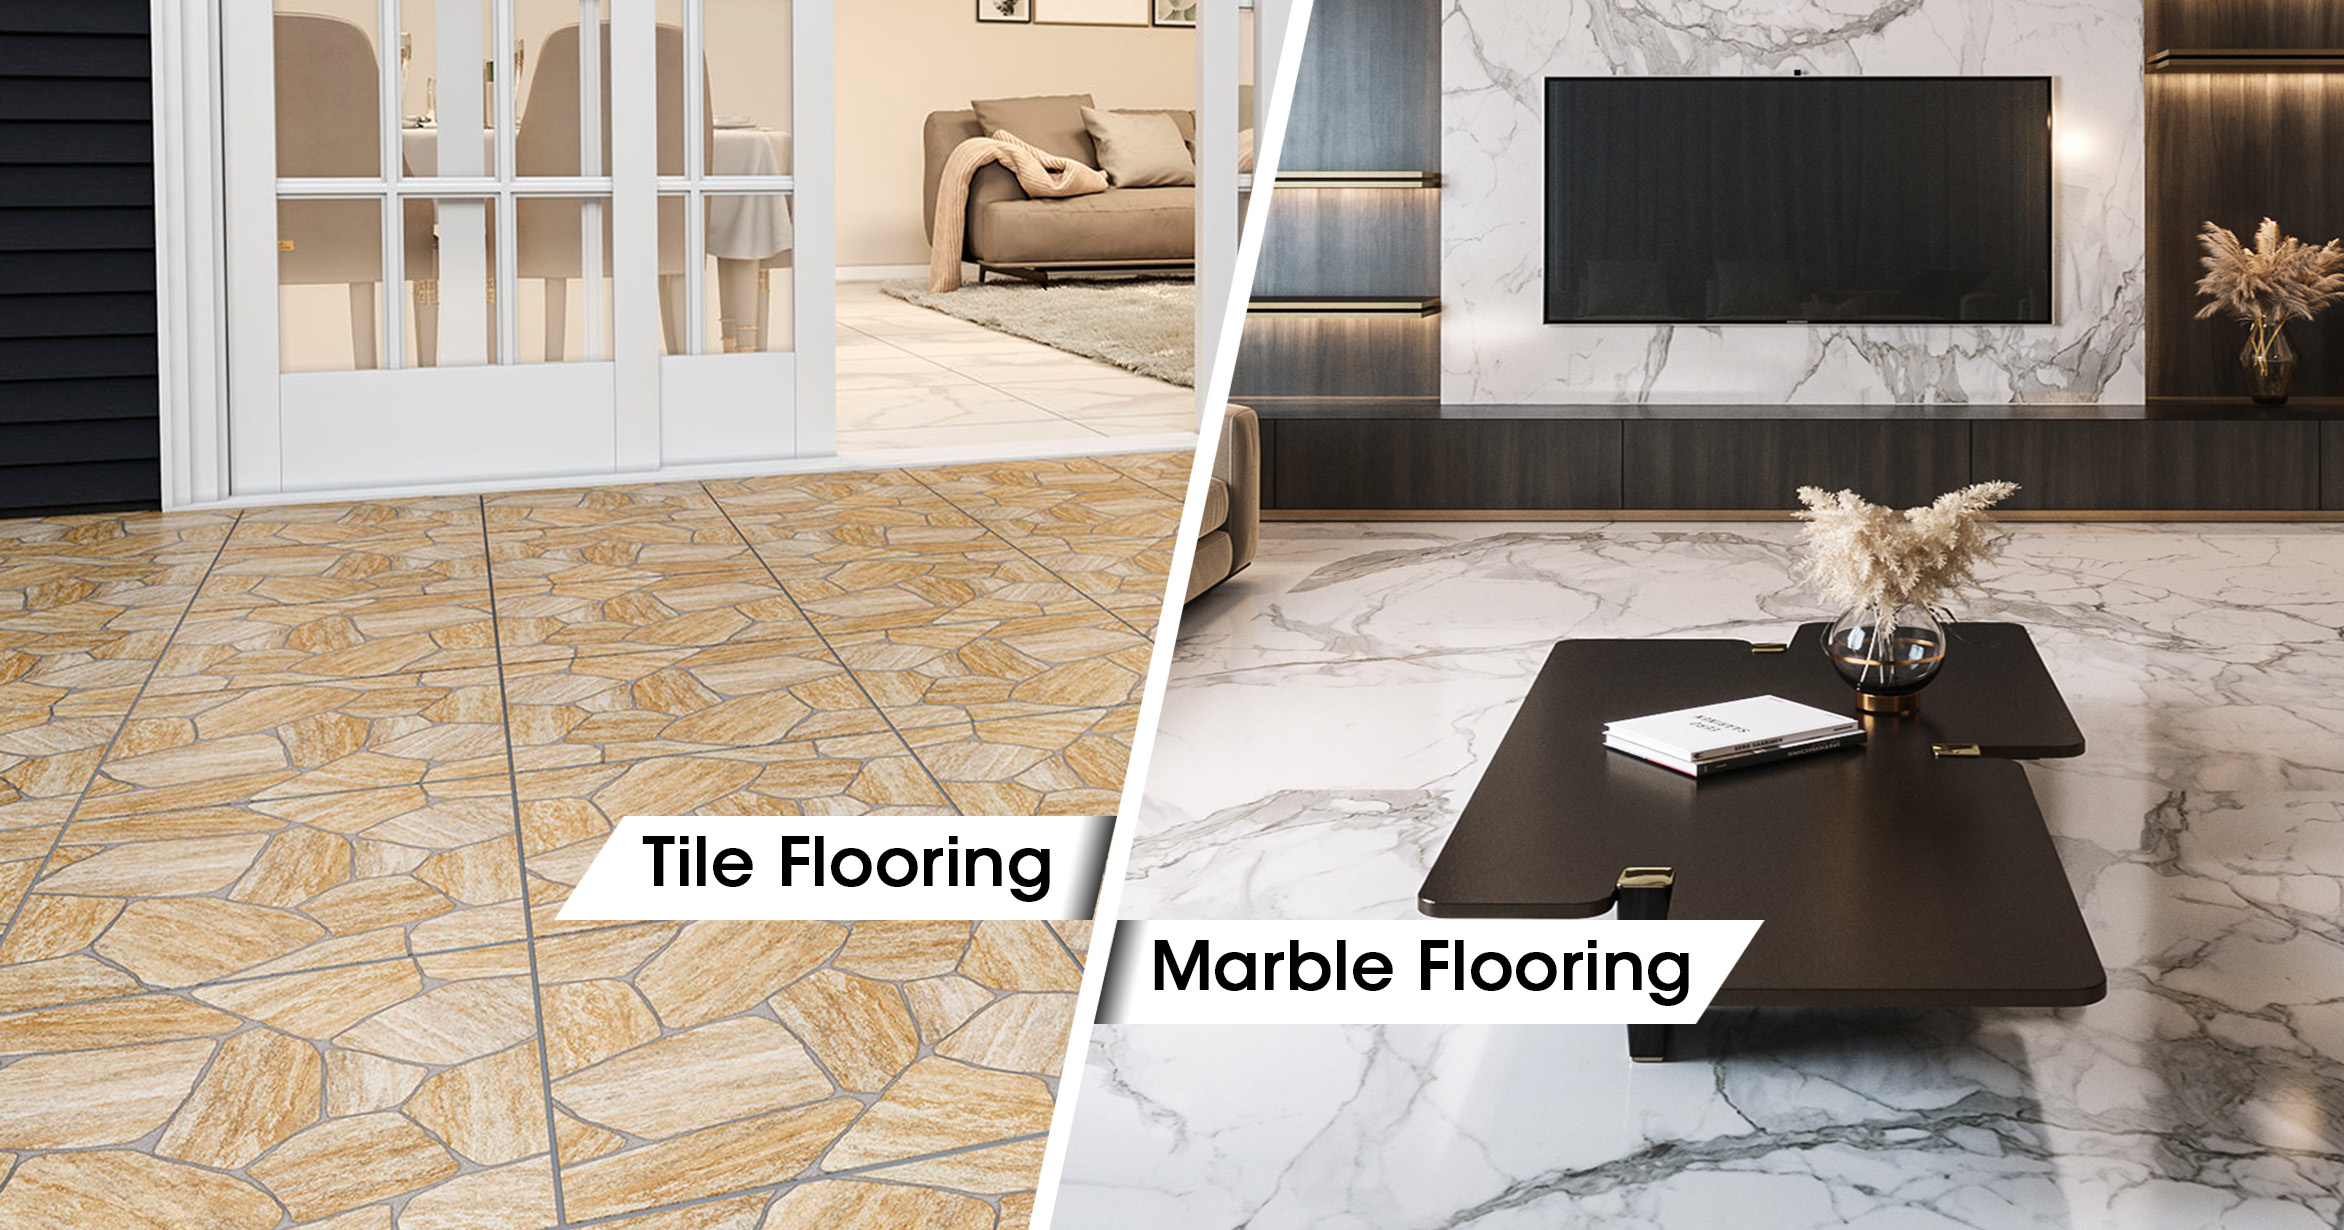 Marble Vs Tiles Difference in Tamil